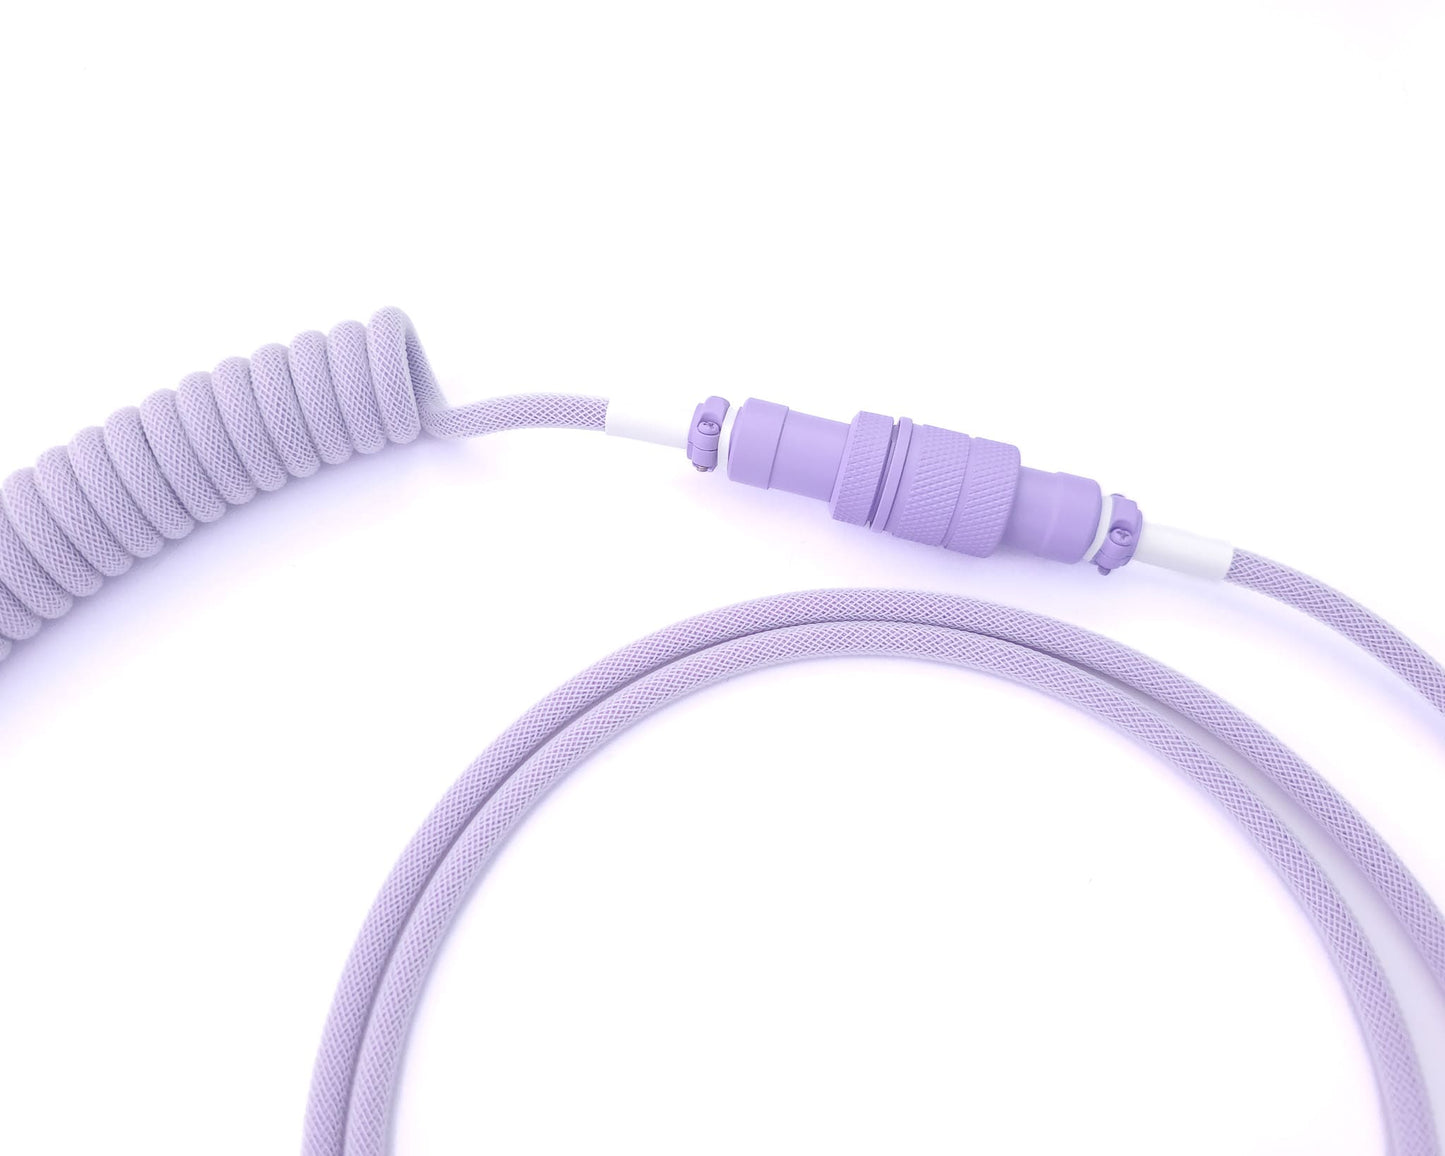 Coiled keyboard cable "Lavender"